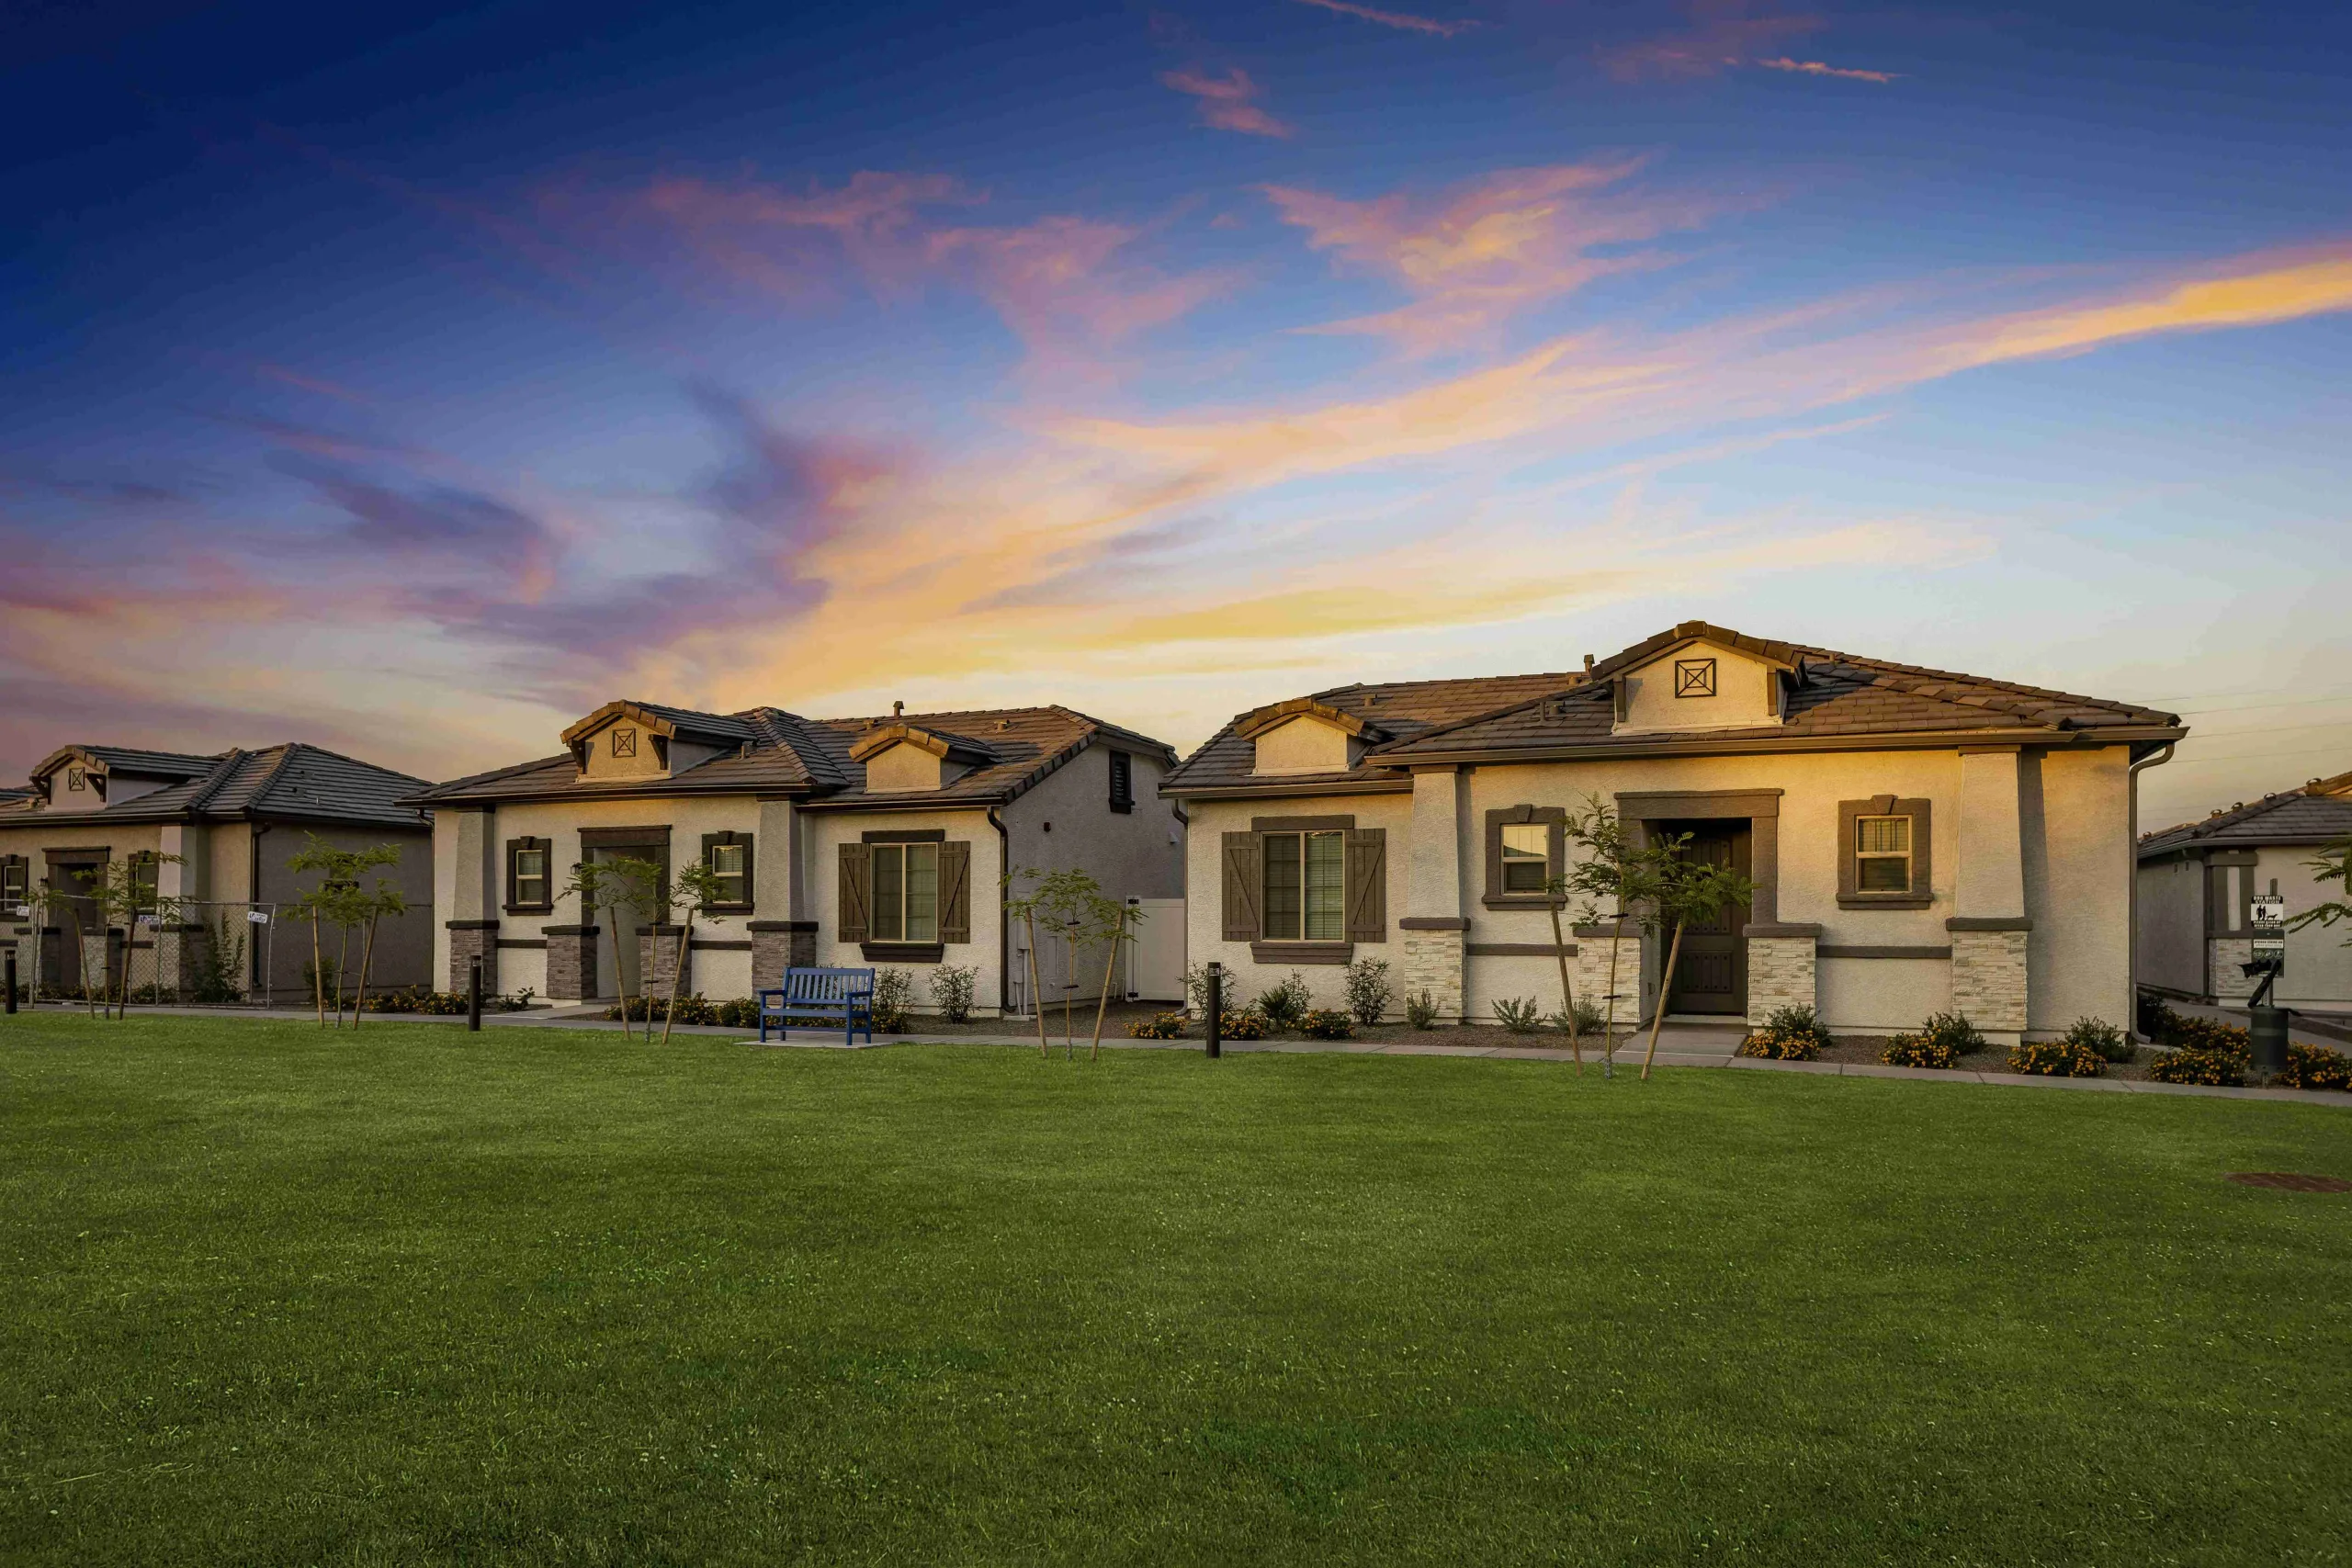 Front of homes during sunset facing the community lawn and pool.